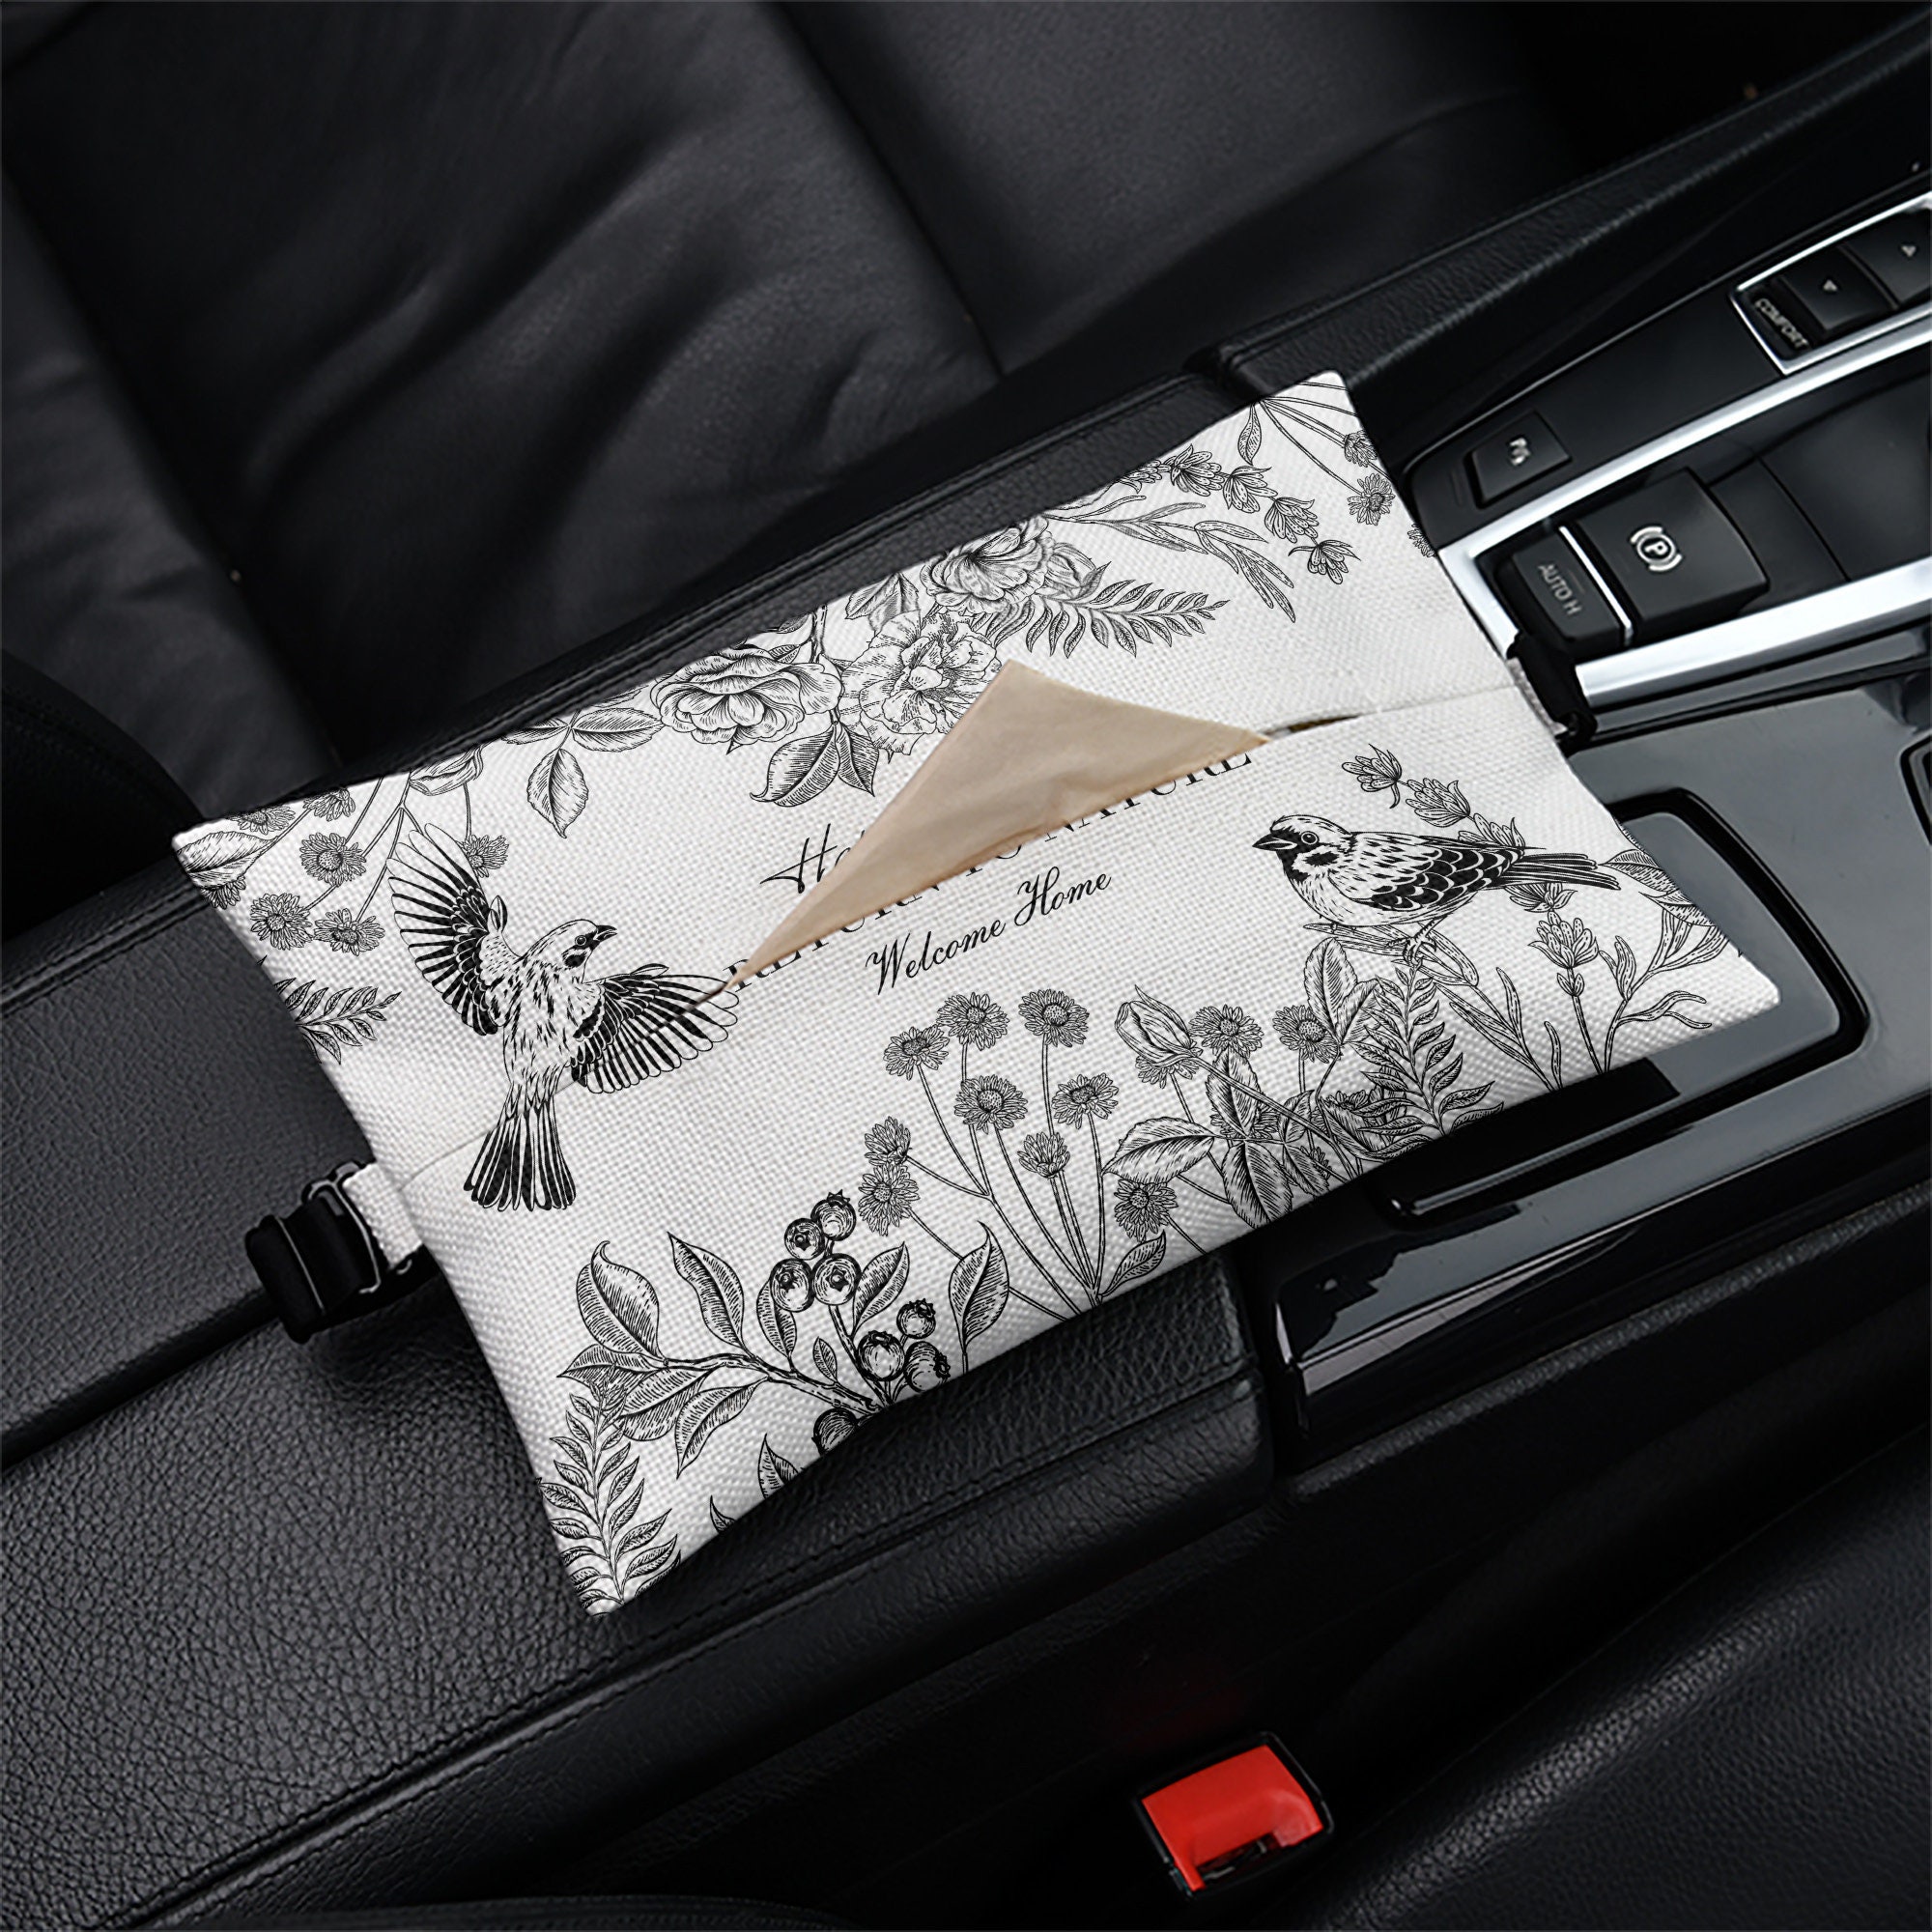  2PCS Multi-functional Car Visor Organizer with Tissue and Mask  Holder, Sun Visor Napkin Dispenser, Premium Car Tissue Box for Vehicle,  Perfect Car Accessory for Keeping Essentials Handy and Organized :  Automotive